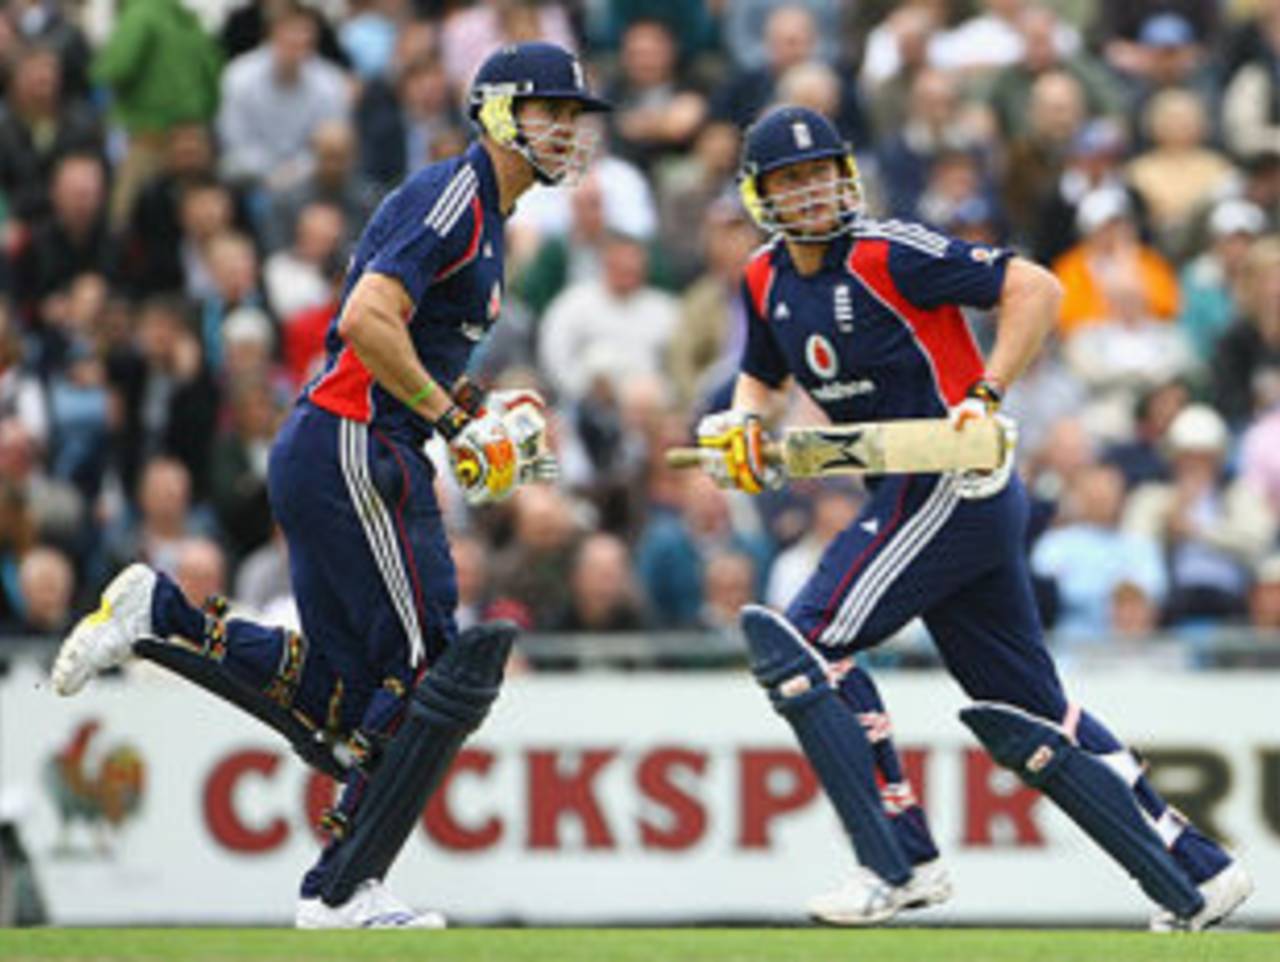 Kevin Pietersen and Andrew Flintoff jog through for another single during their fourth-wicket stand of 158, England v South Africa, 1st ODI, Headingley, August 22, 2008